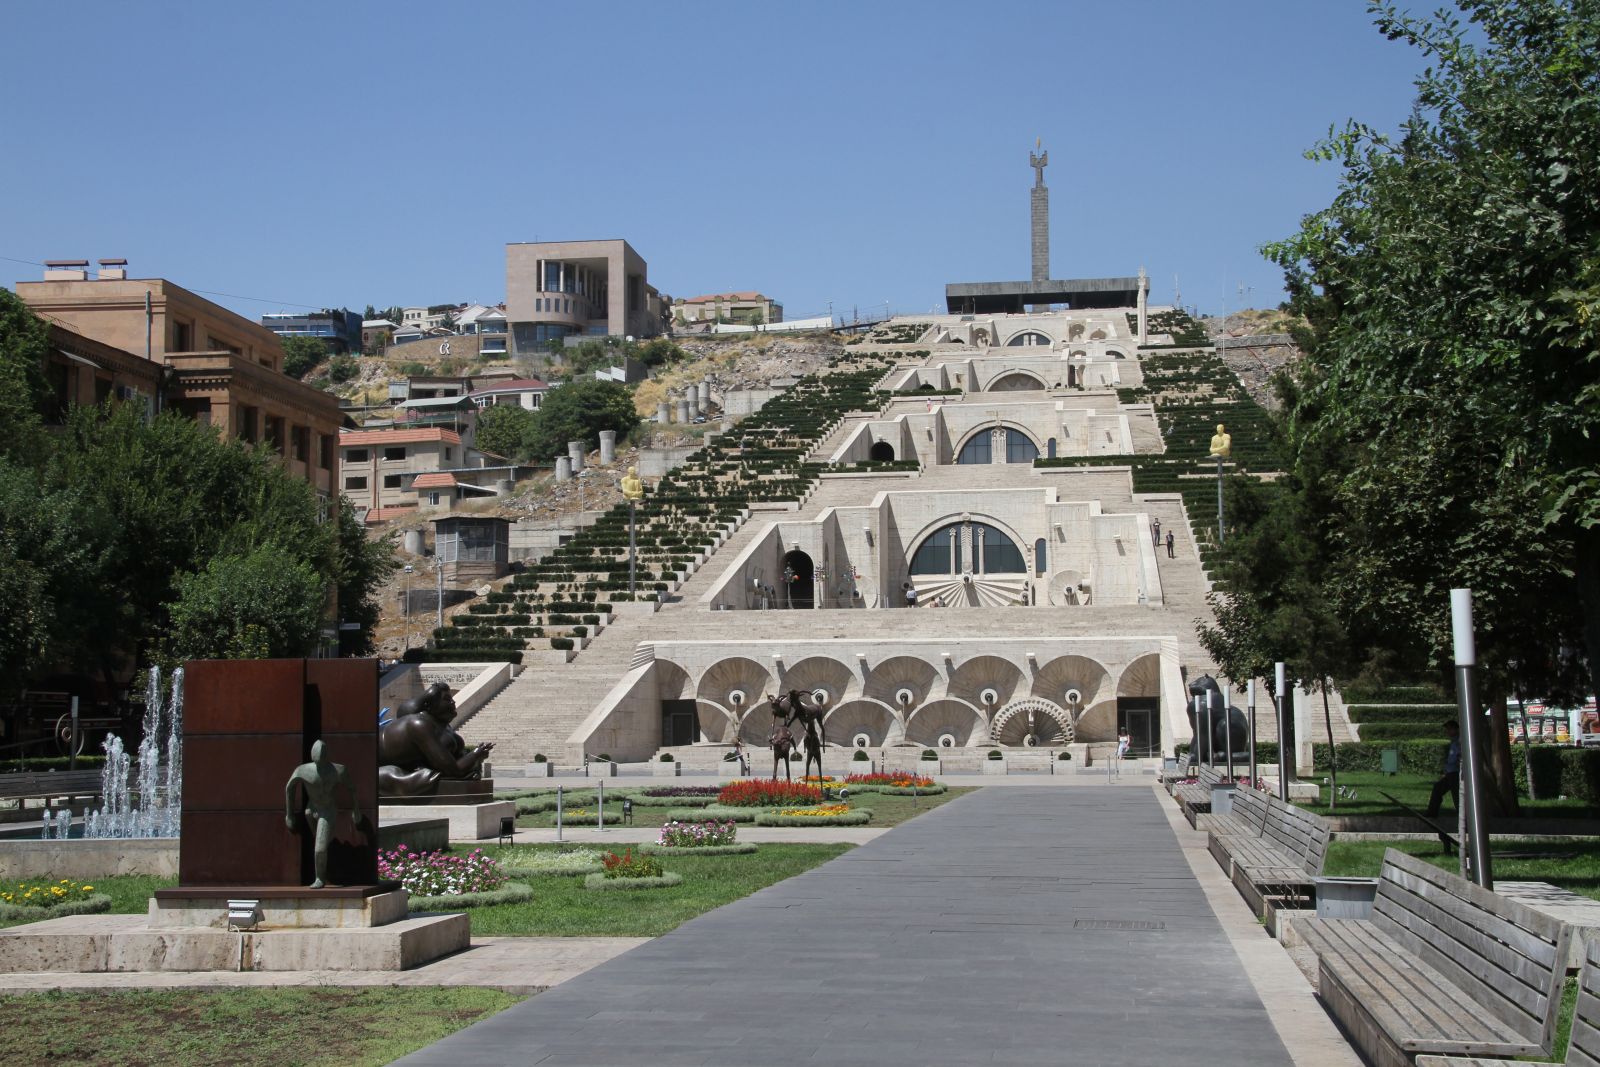 Located at one of the spacious exhibition halls of the Cafesjian Center for the Arts inside Yerevan’s giant marble staircase, the Cascade Complex,